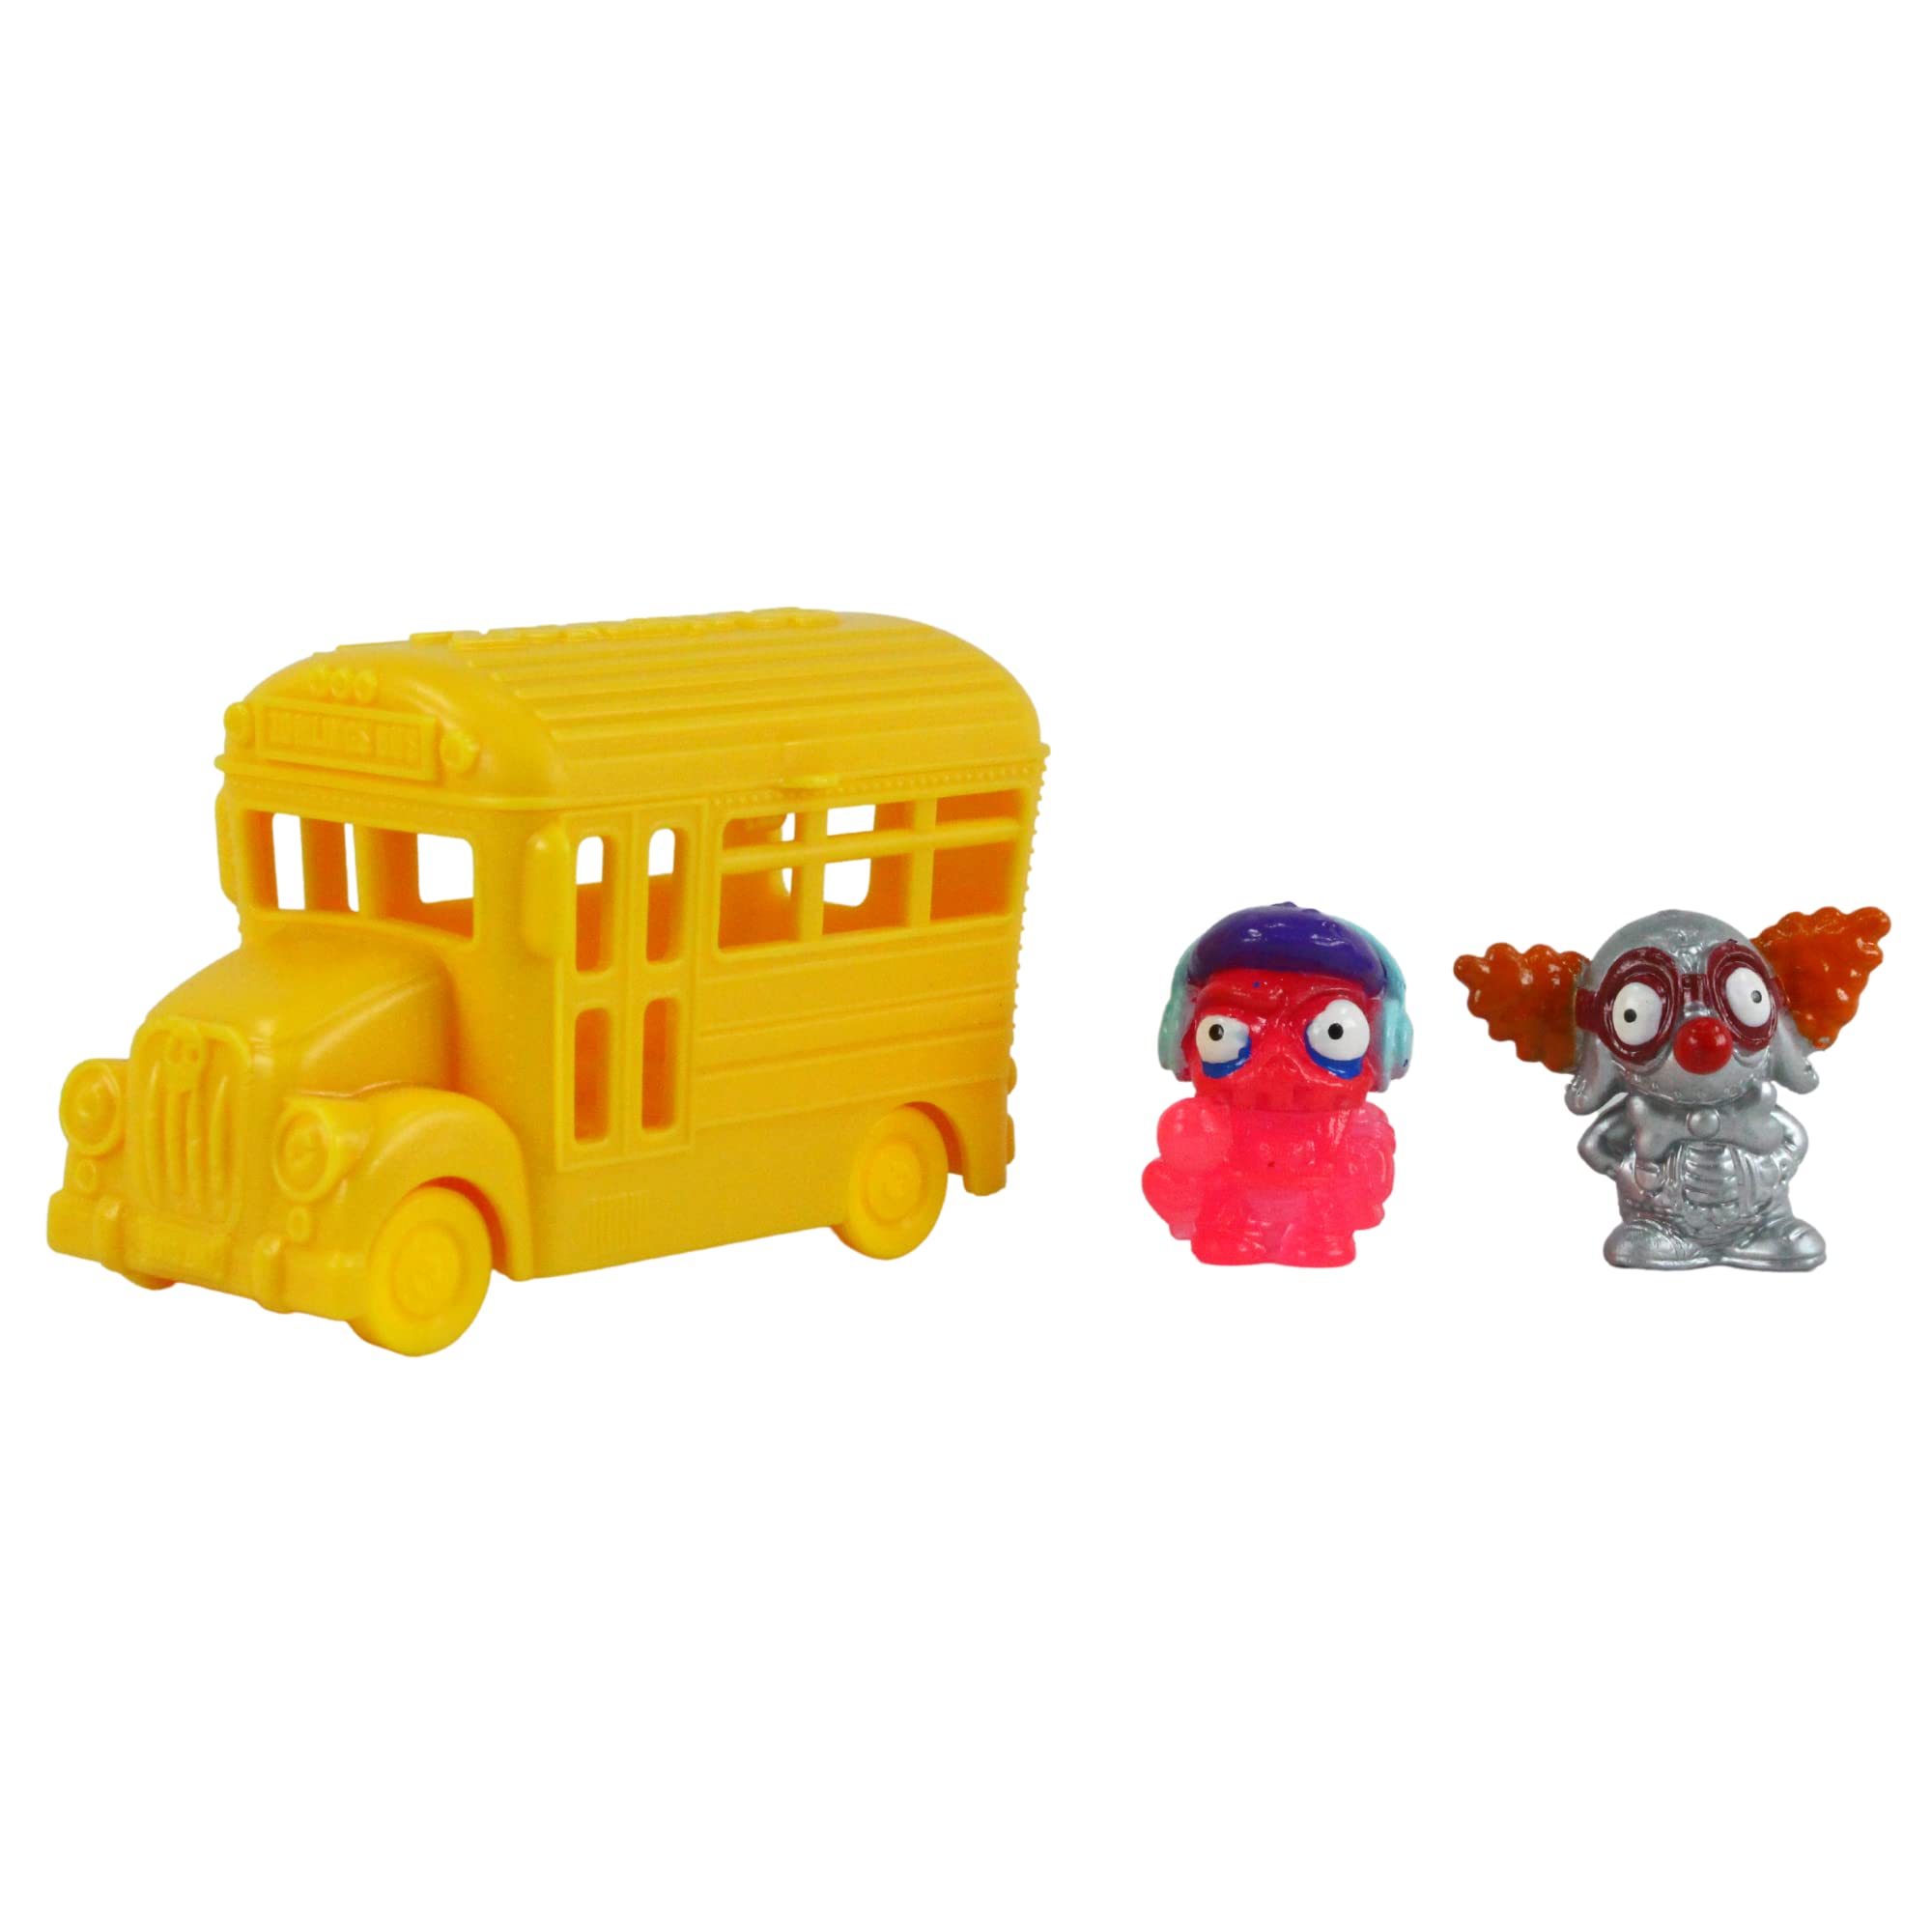 Zomlings In The Town Series 4 Set of 3 Zom Mobiles Blind Box Vehicles - Red, Blue & Yellow Buses - Toptoys2u